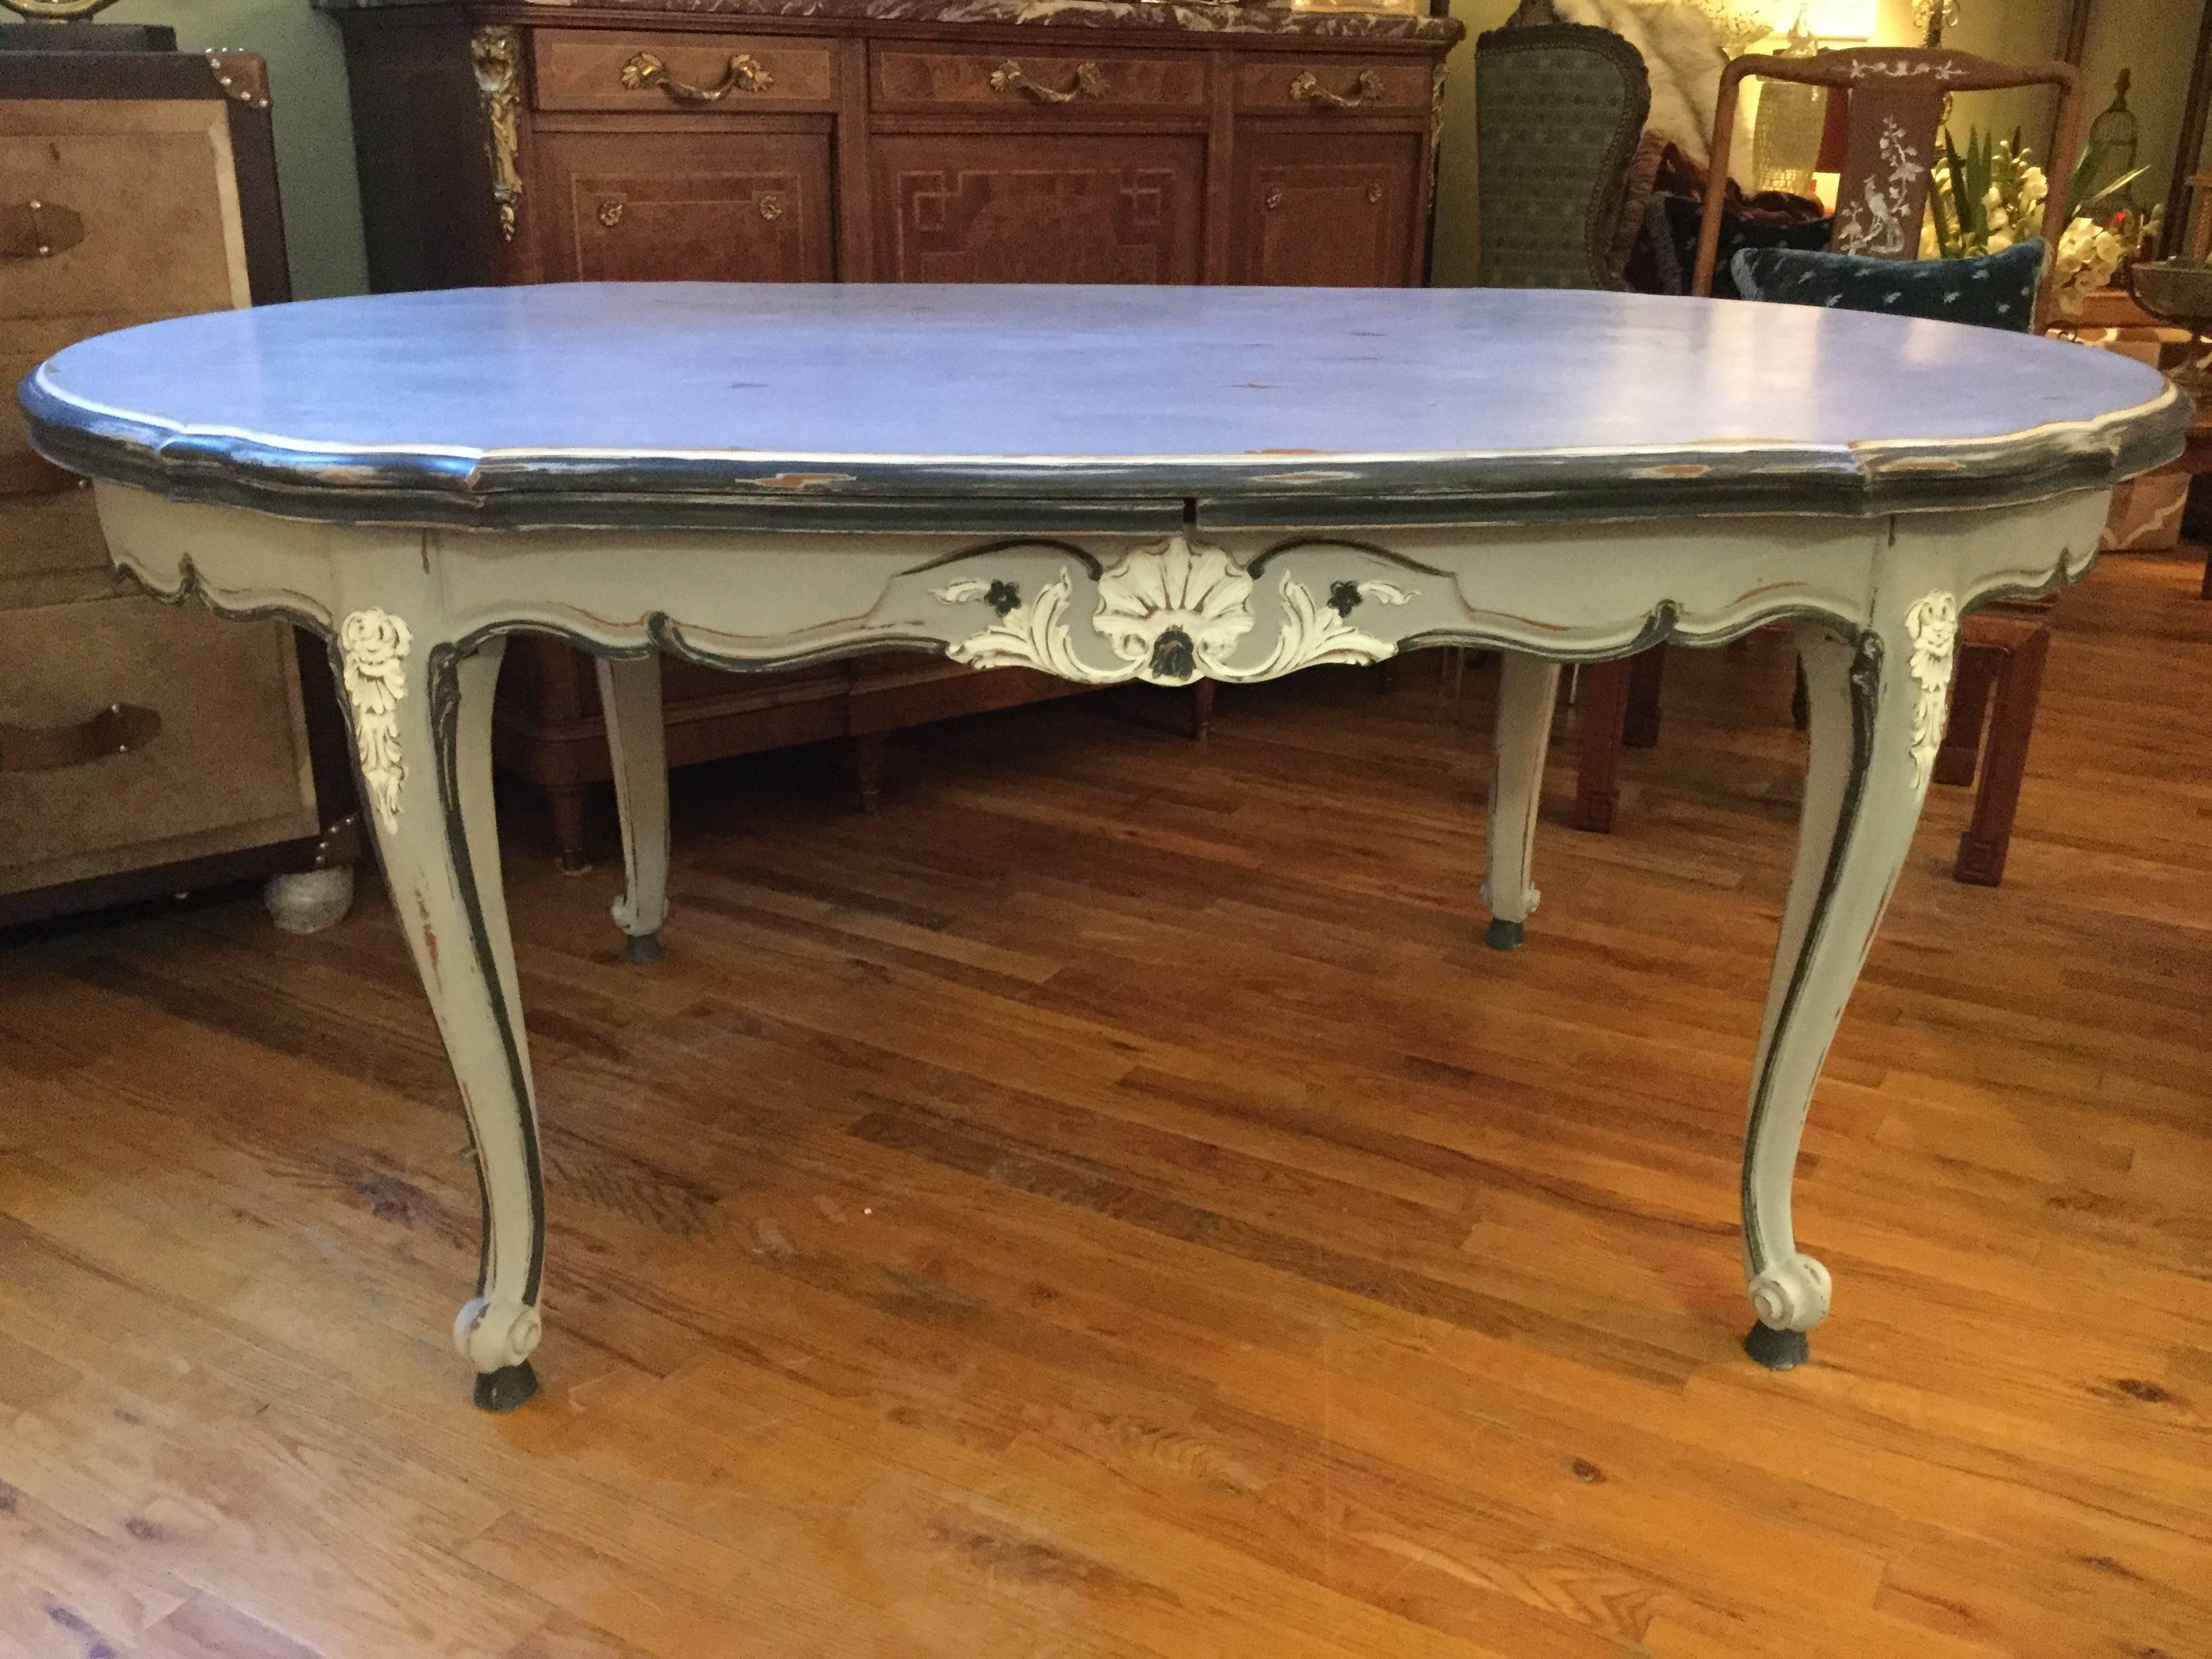 Louis XV-style cherry oval dining table, circa 1930s. With large leaves
stored right under the top, this refectory table has been painted in shades
of light and dark grey with white accents on the carvings around the apron
and on the legs. When